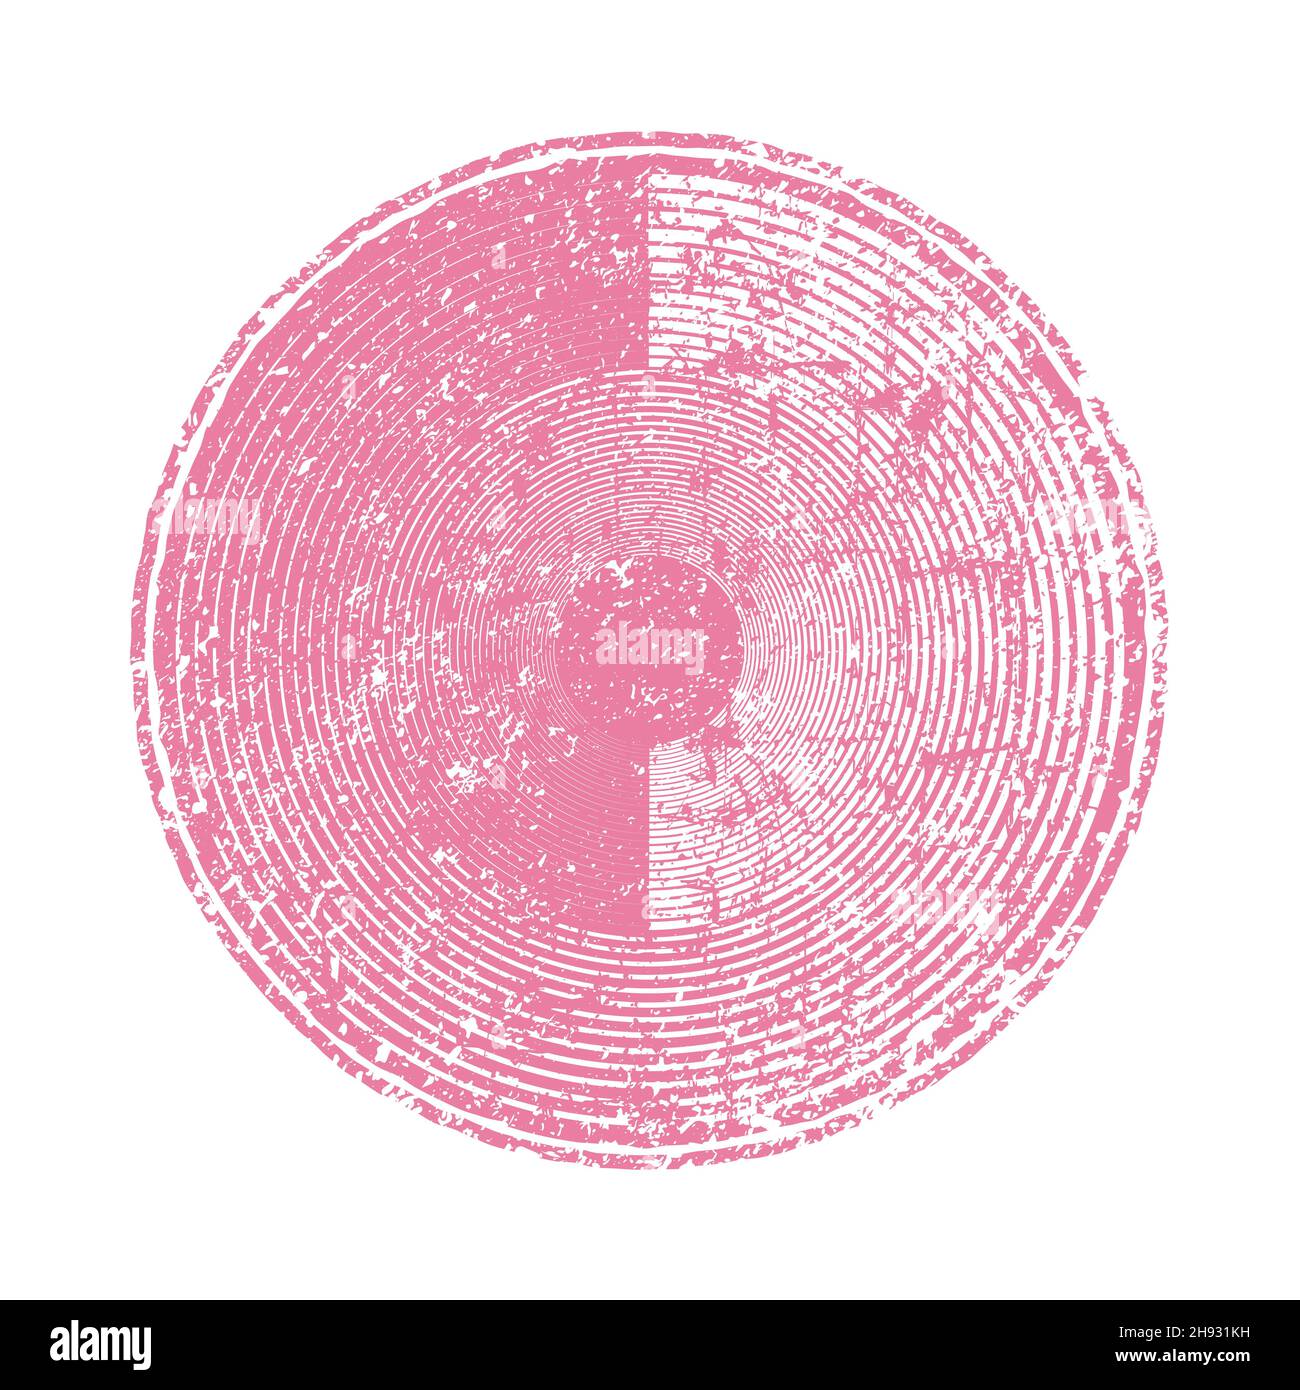 Abstract grunge pink rounded shape. Retro grunge pattern. Design element for banner, poster, grungy effect, template and background Stock Vector